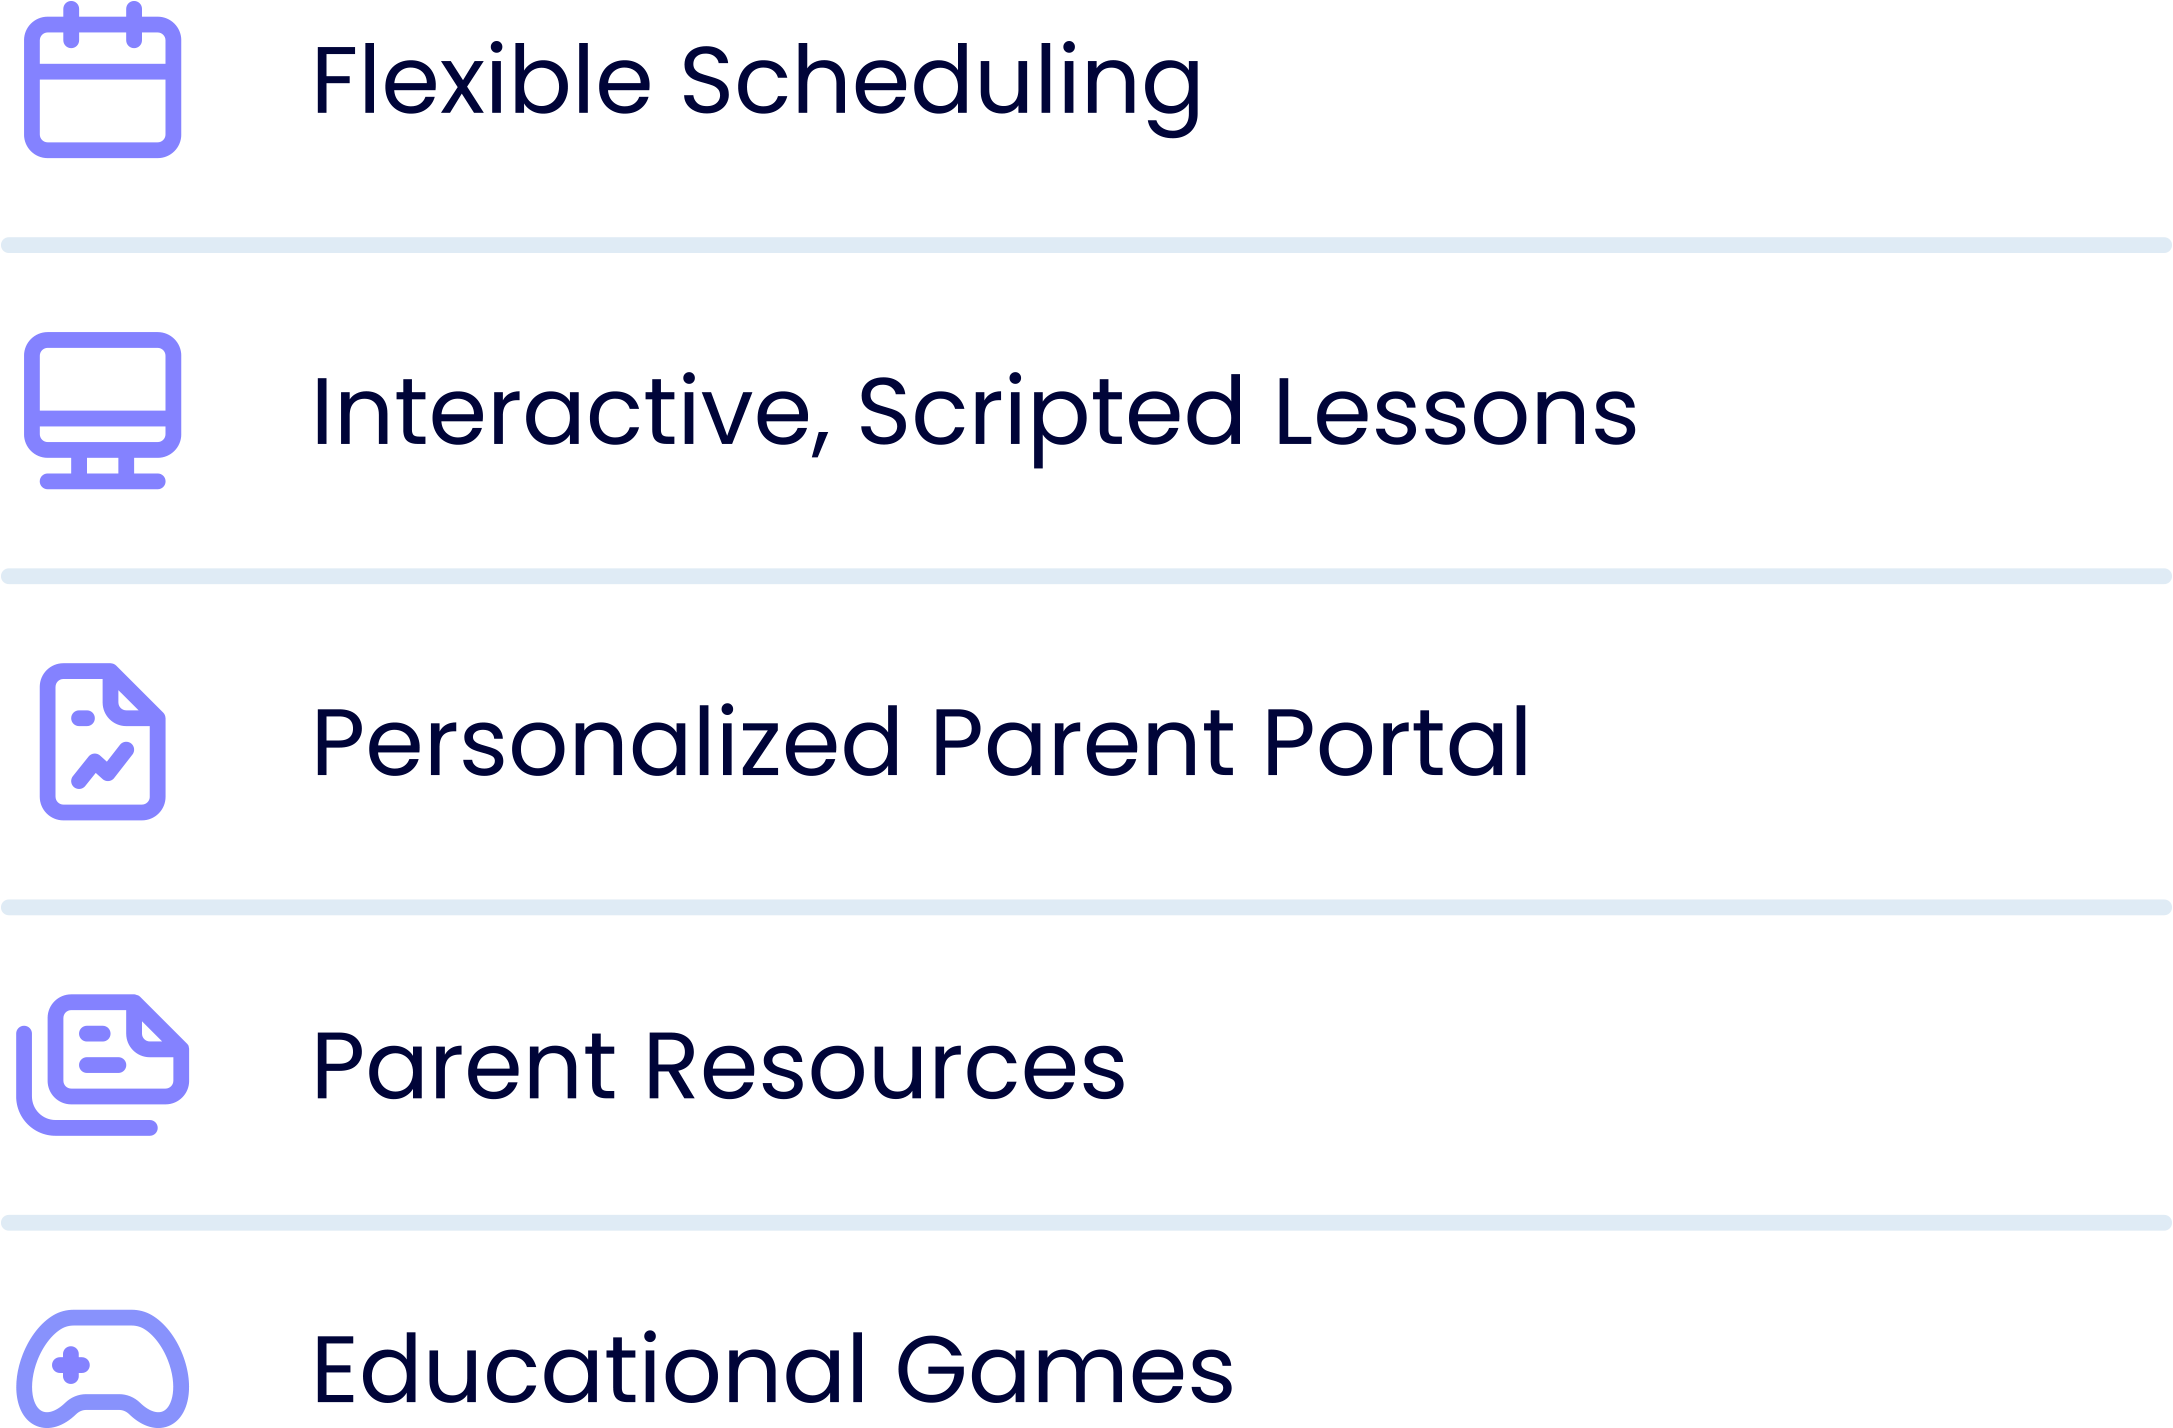 Flexible scheduling, interactive, scripted lessons, personalized parent portal, parent resources, educational games